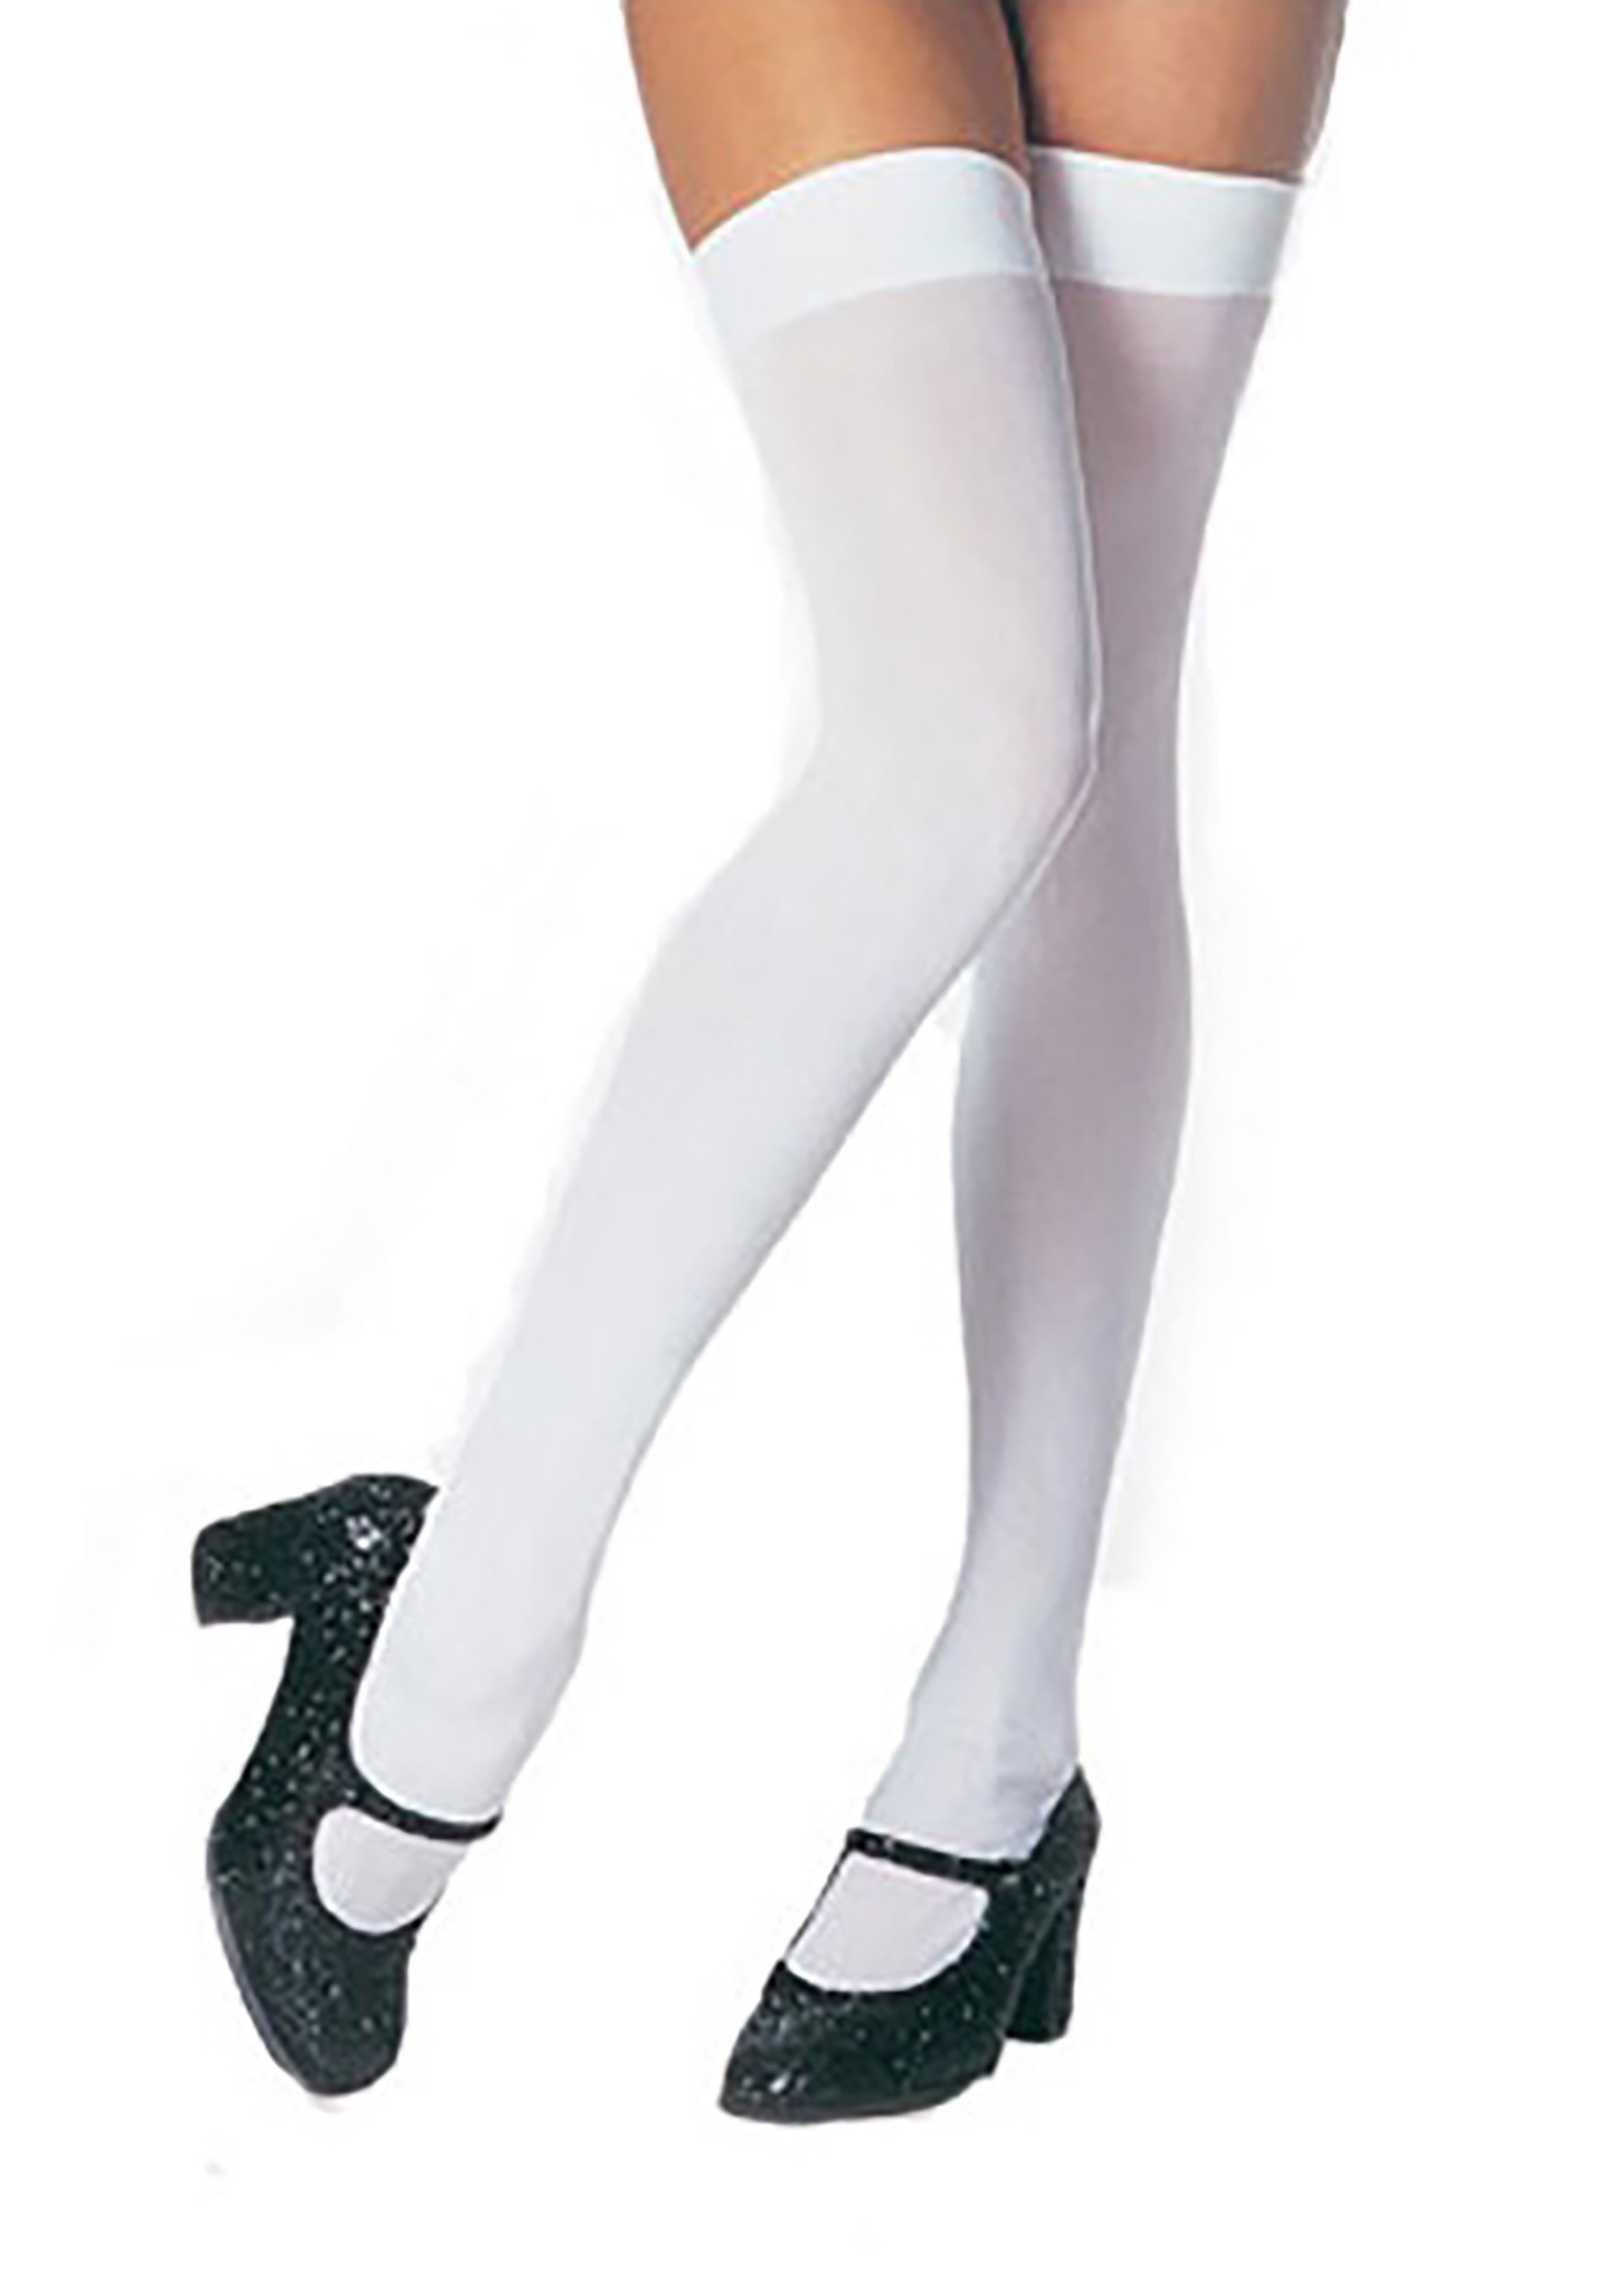 https://images.halloweencostumes.ca/products/6618/1-1/plus-size-thigh-high-white-stockings.jpg